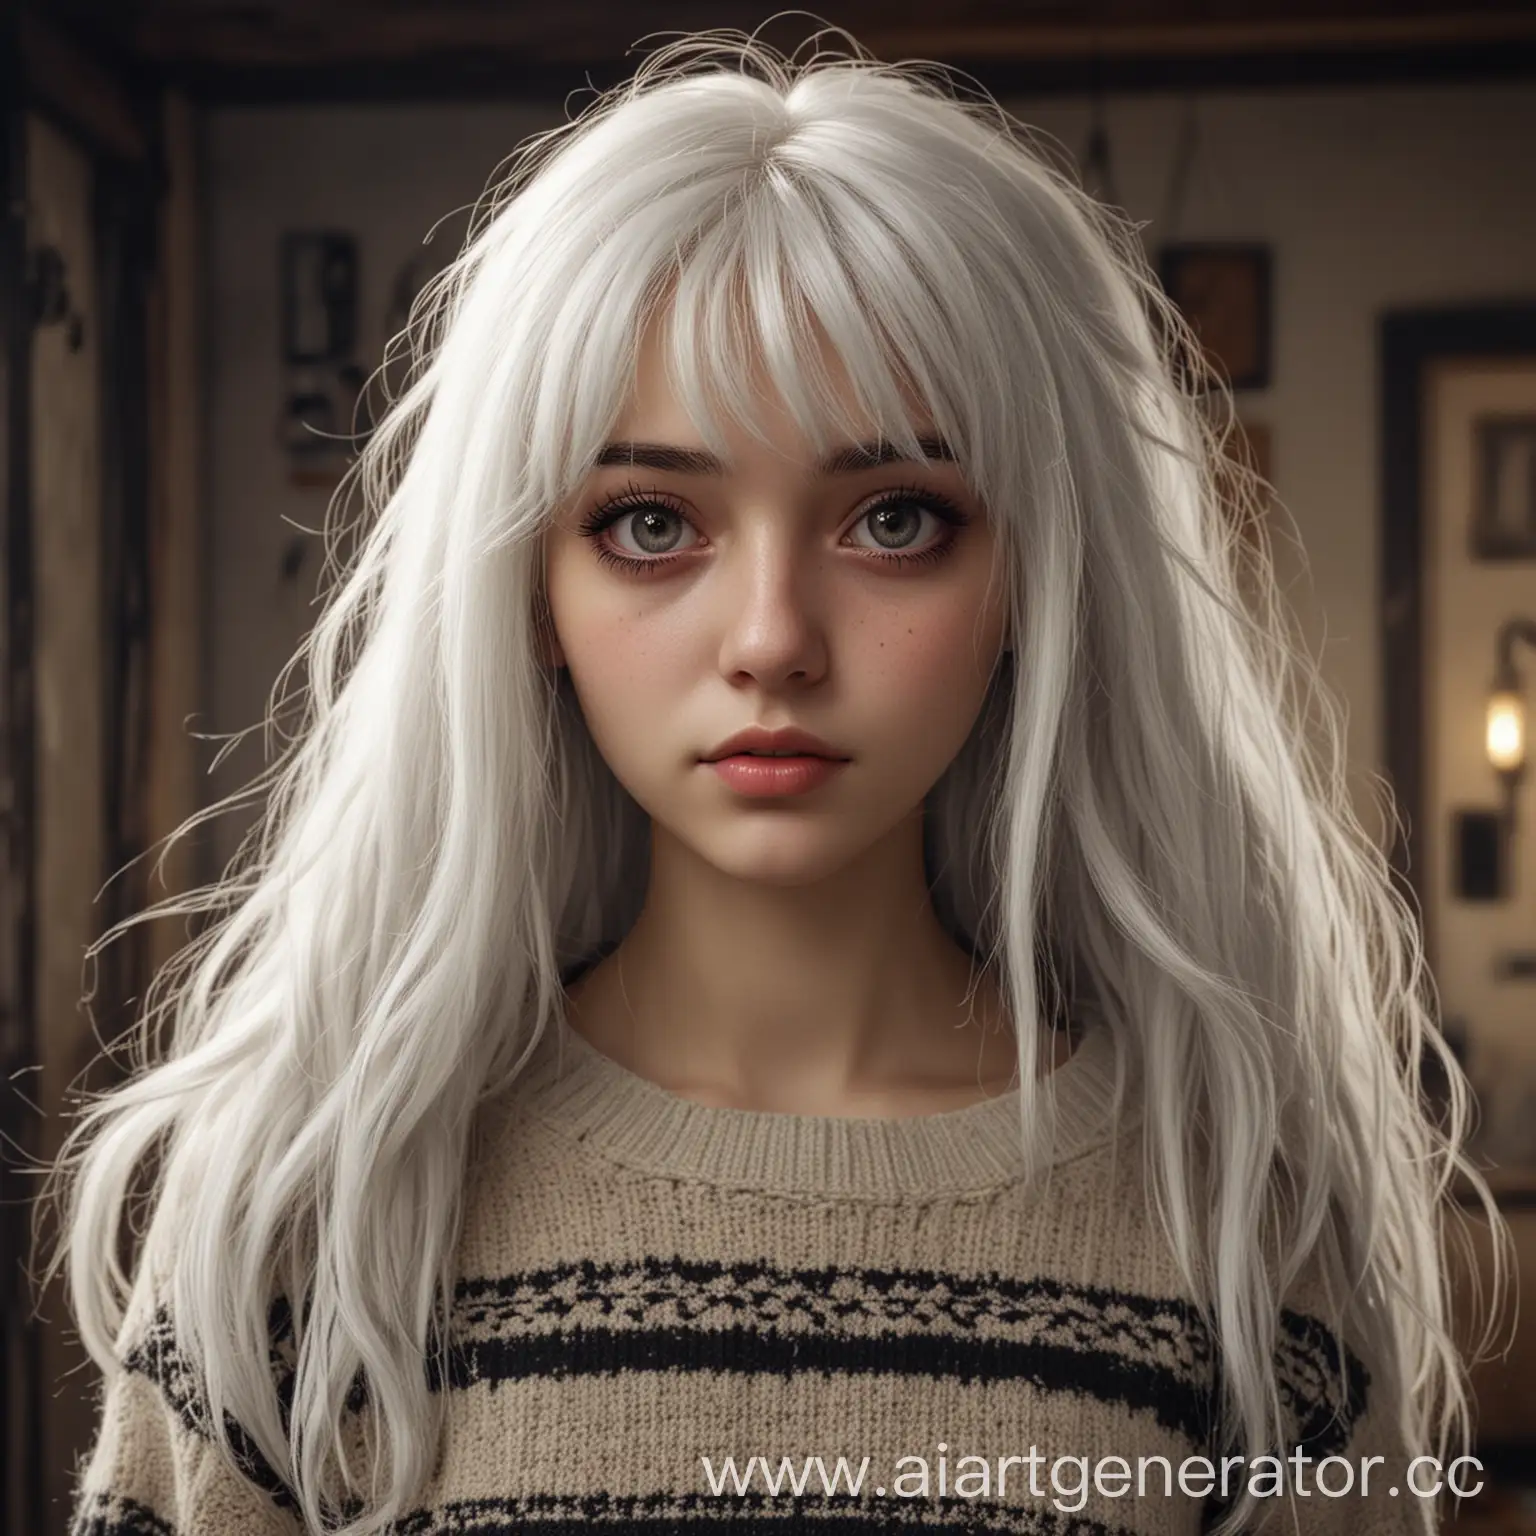 Mysterious-Girl-with-Long-White-Hair-in-Tattered-Sweater